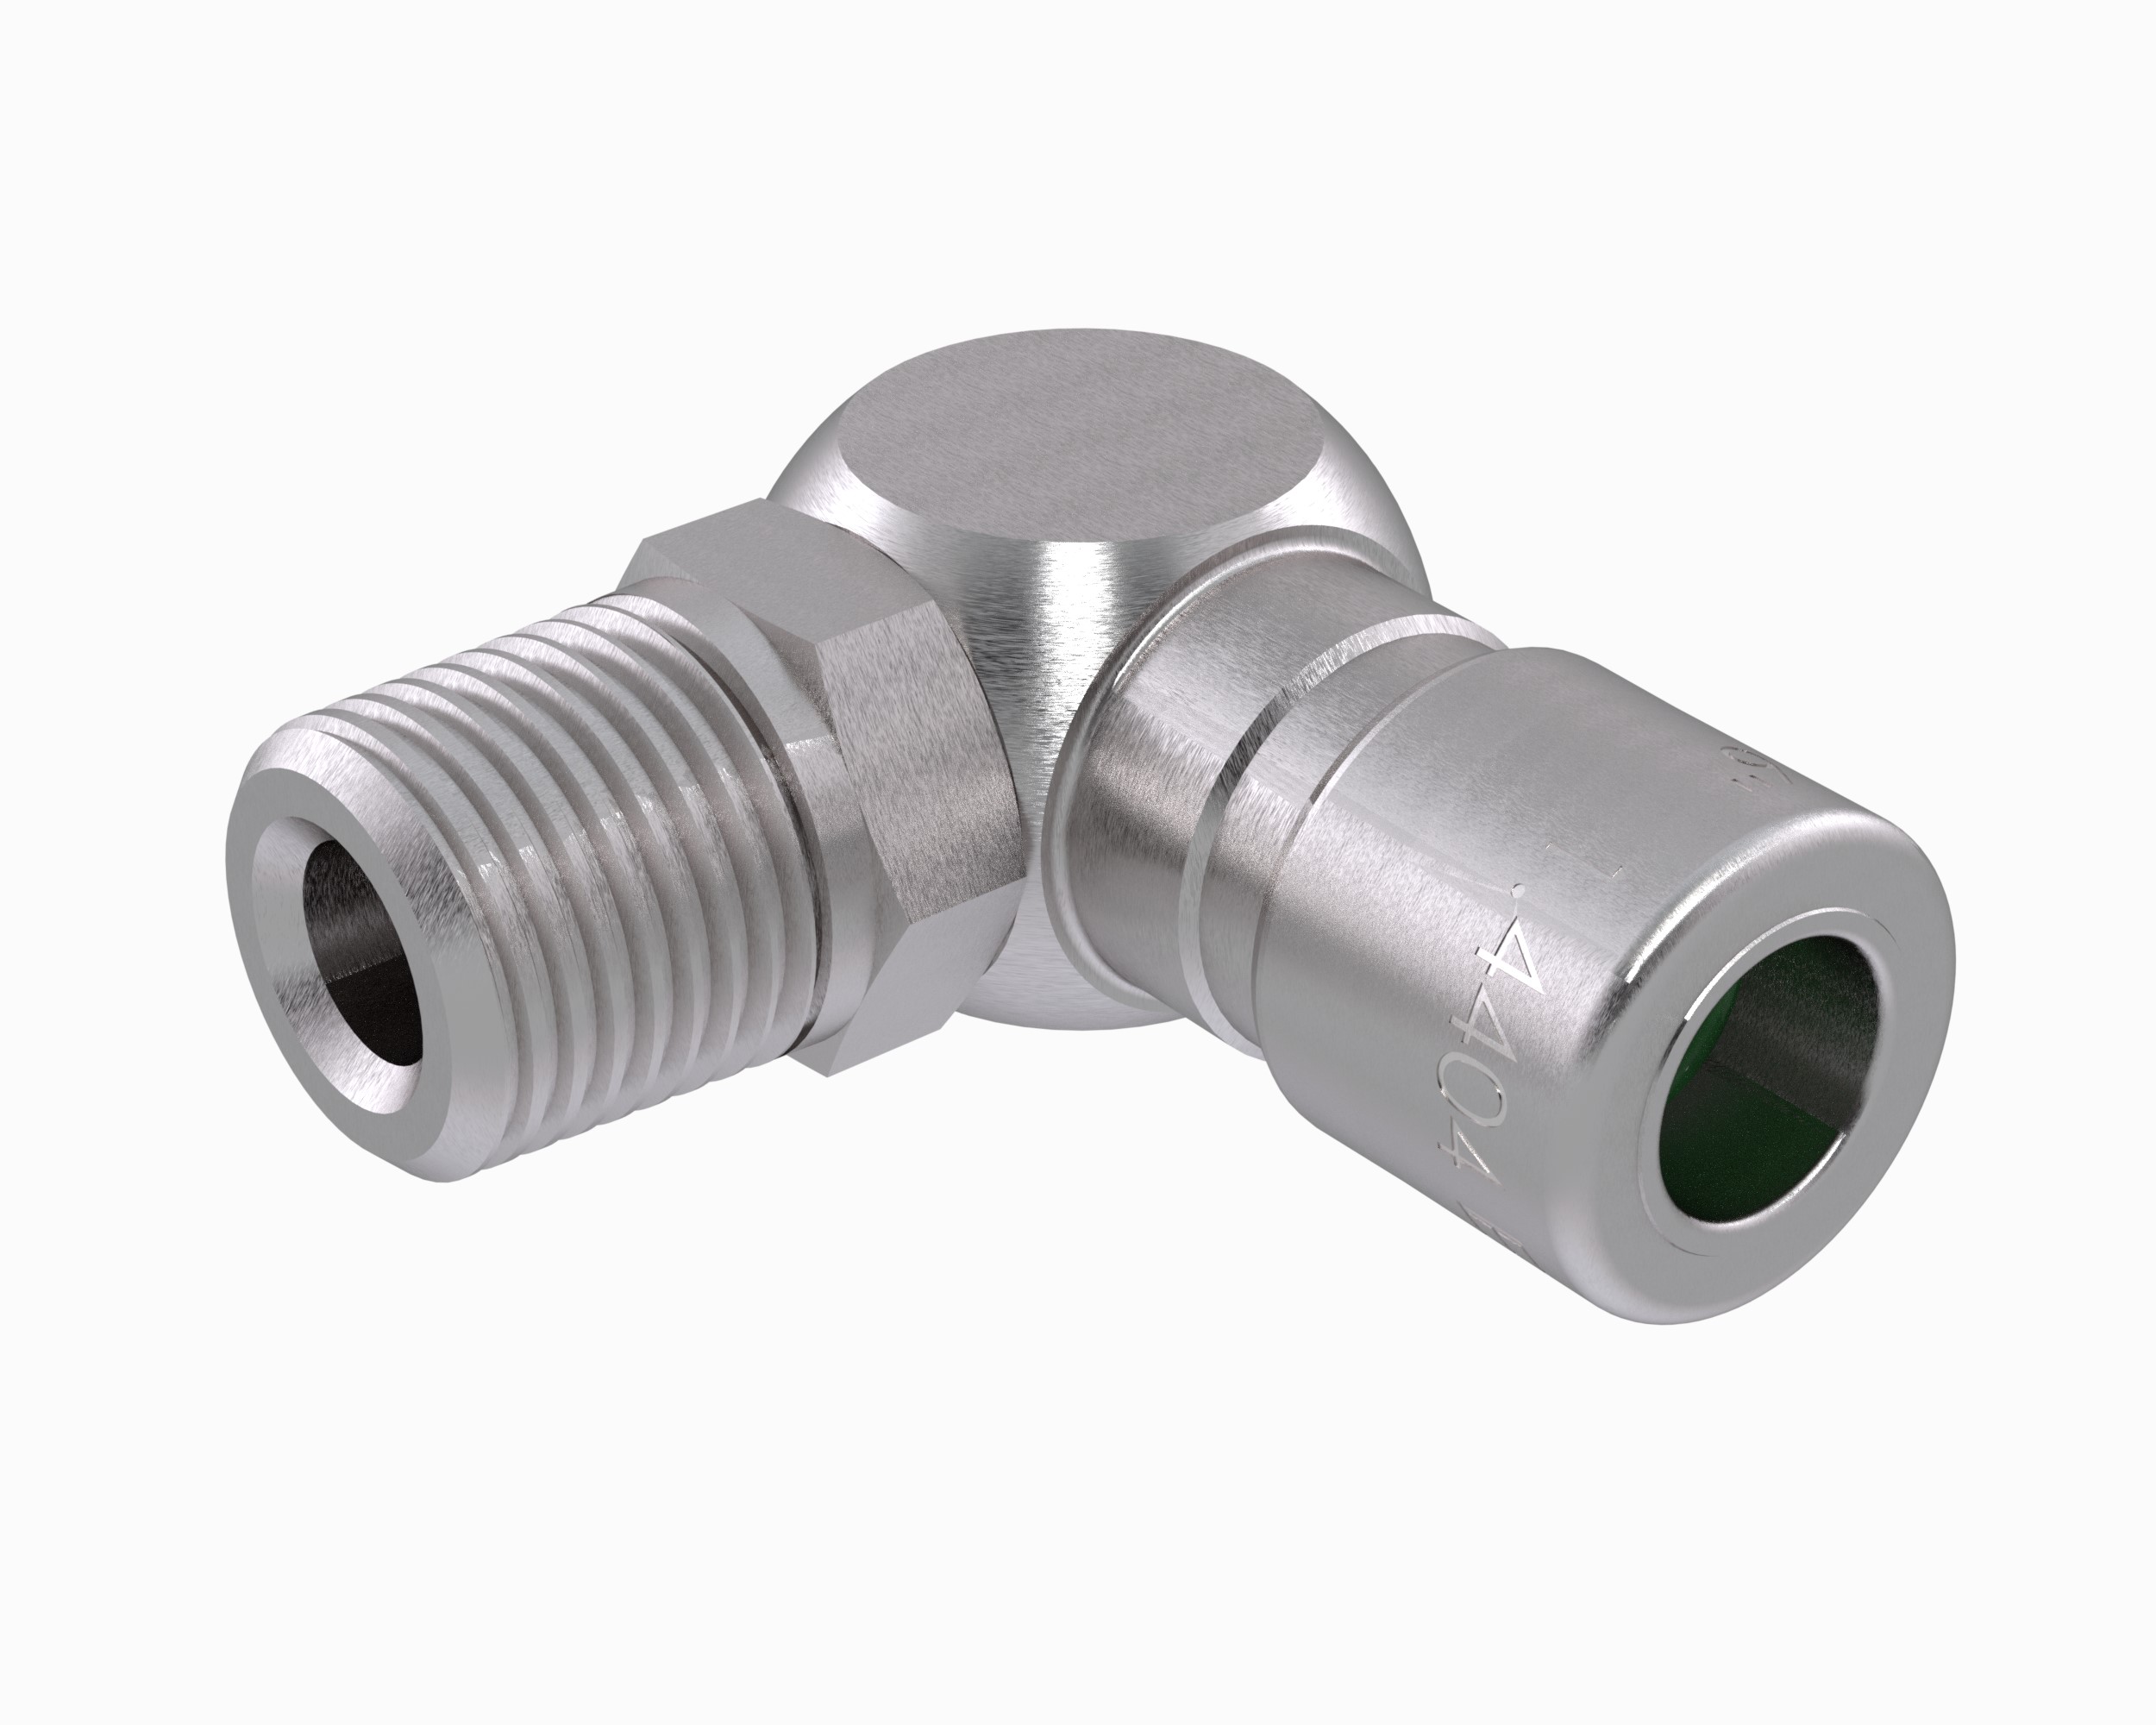 Double Seal Elbow Push To Connect Fittings, Stainless STl, NPT Thread X Inch Tube - INOXLINE©